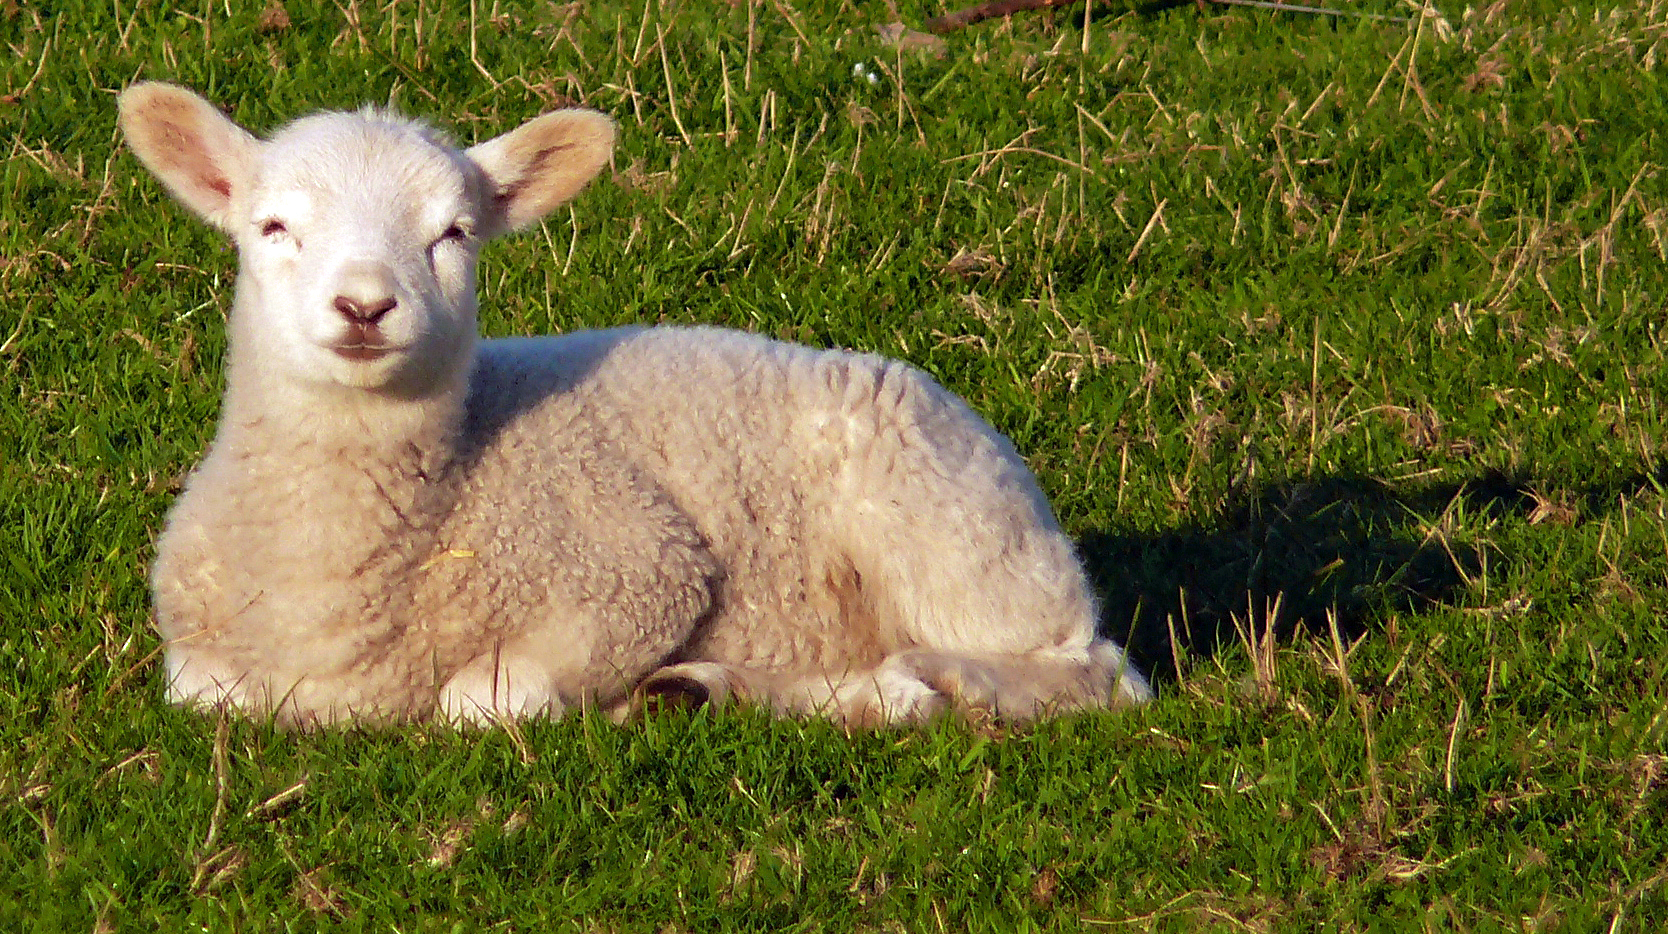 white lamb lying in a green field with grass